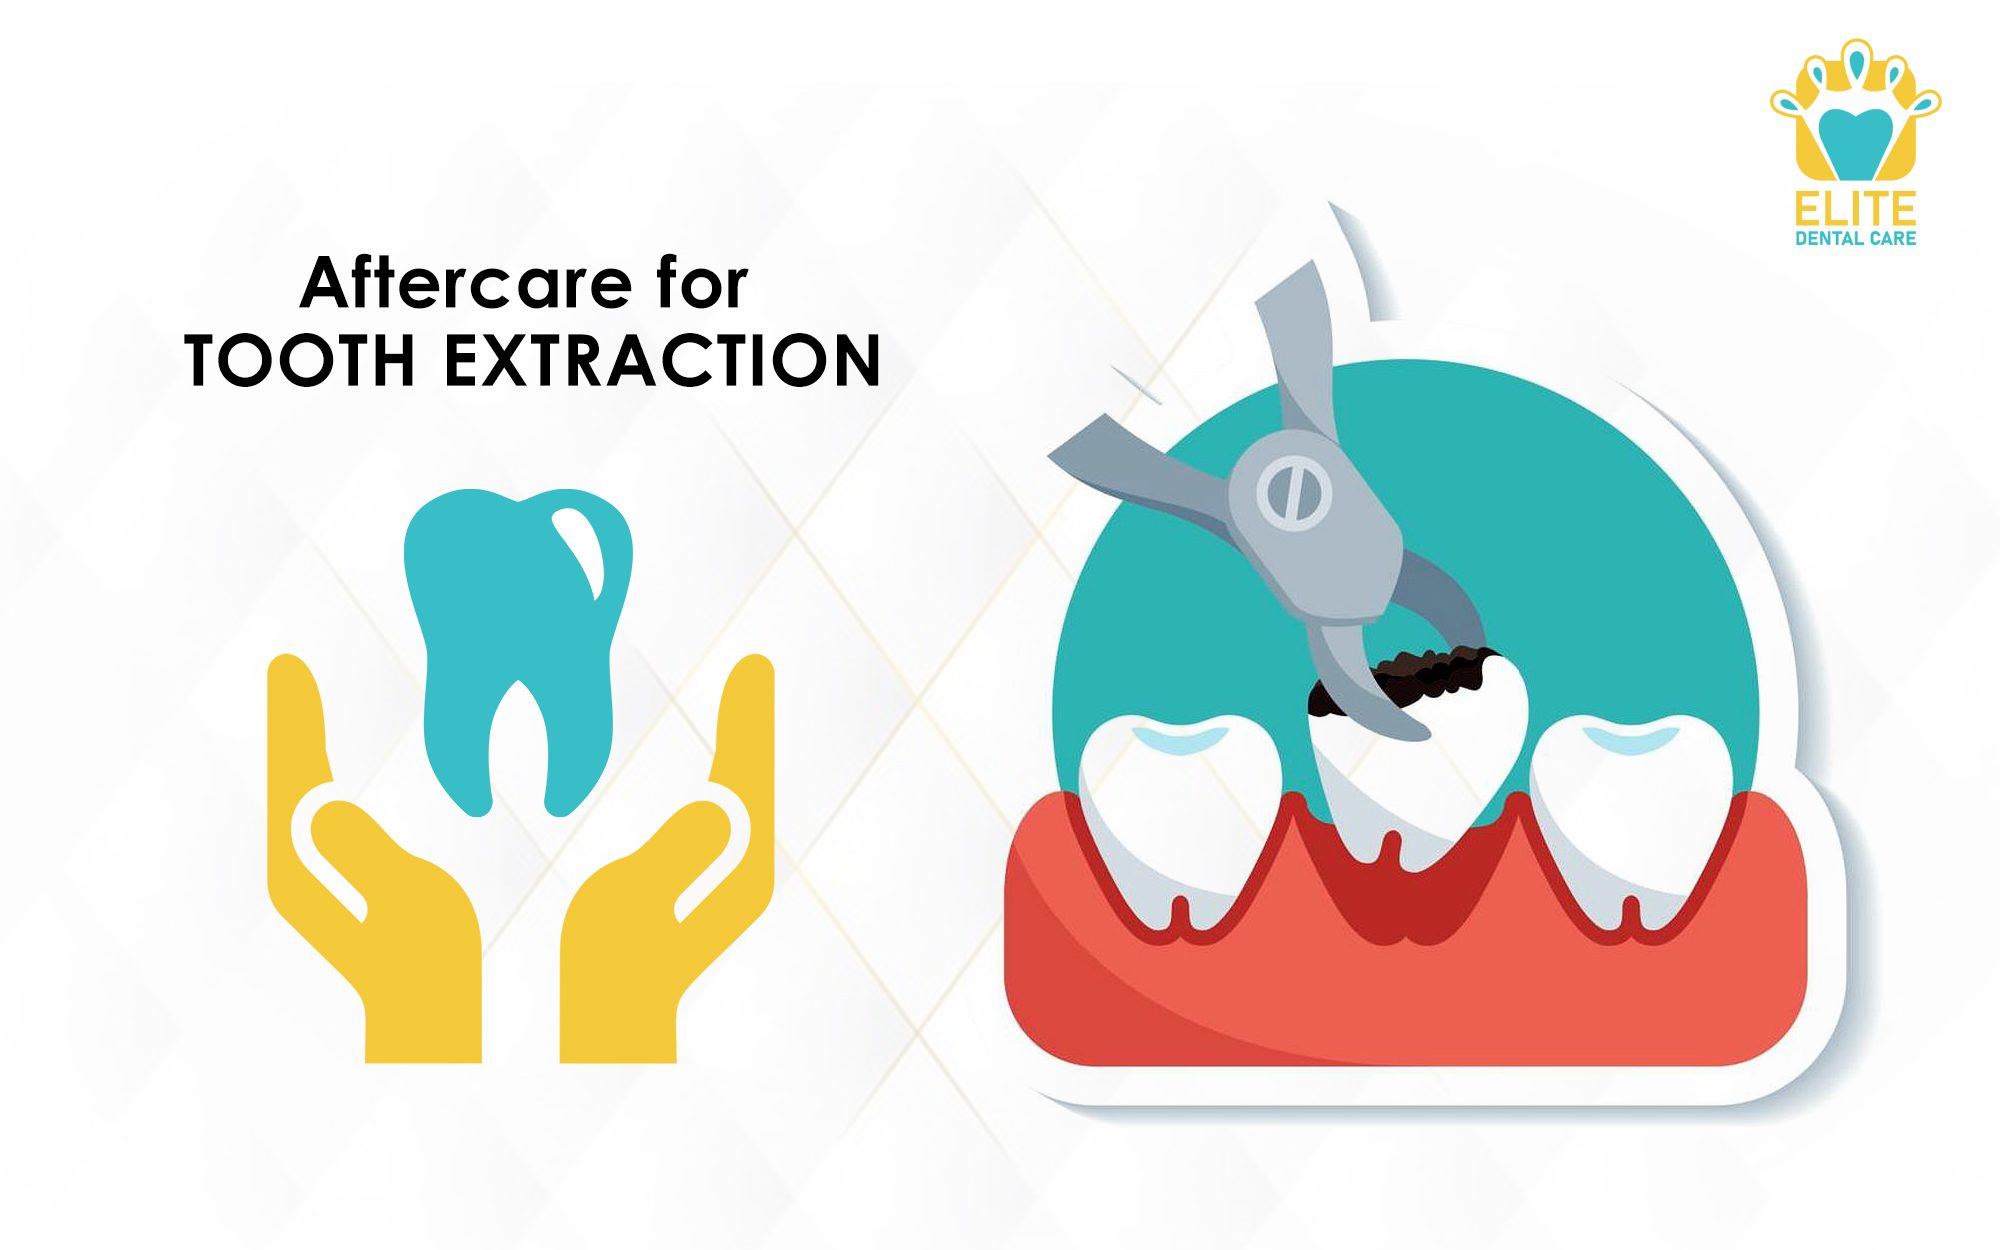 AFTERCARE FOR TOOTH EXTRACTION – ELITE DENTAL CARE TRACY